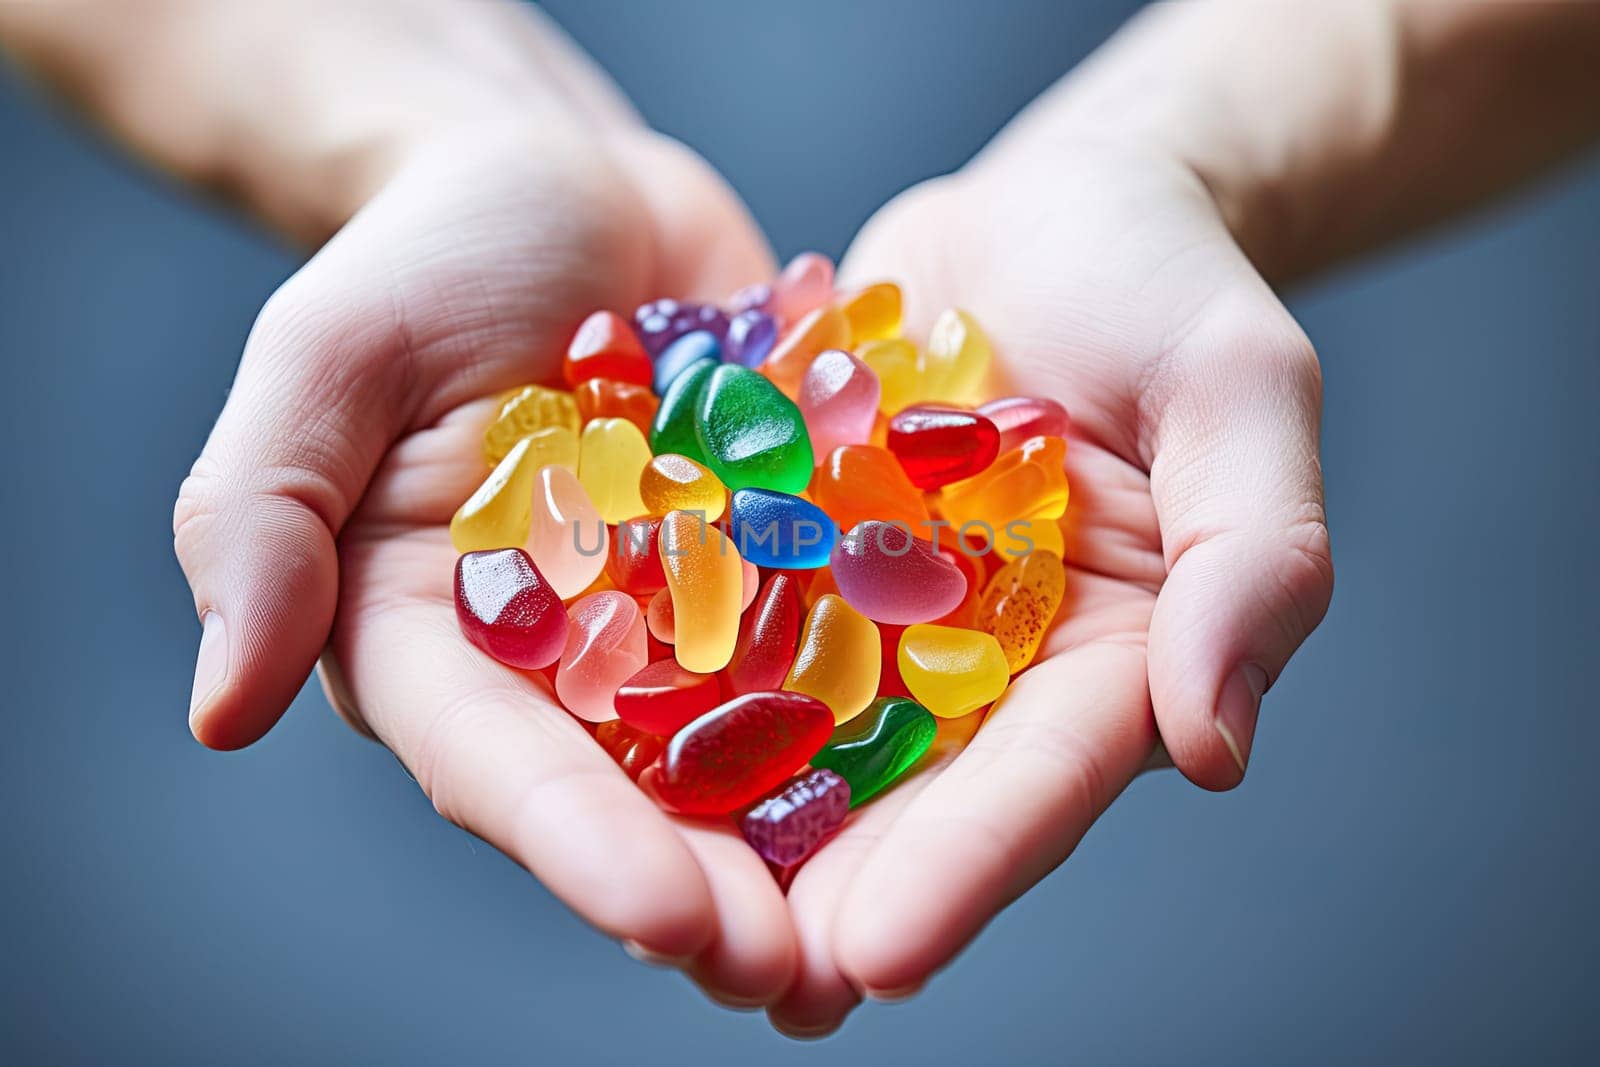 CBG Gummies. two hands holding small pieces of gums in the shape of a heart made out of multi - colored gums